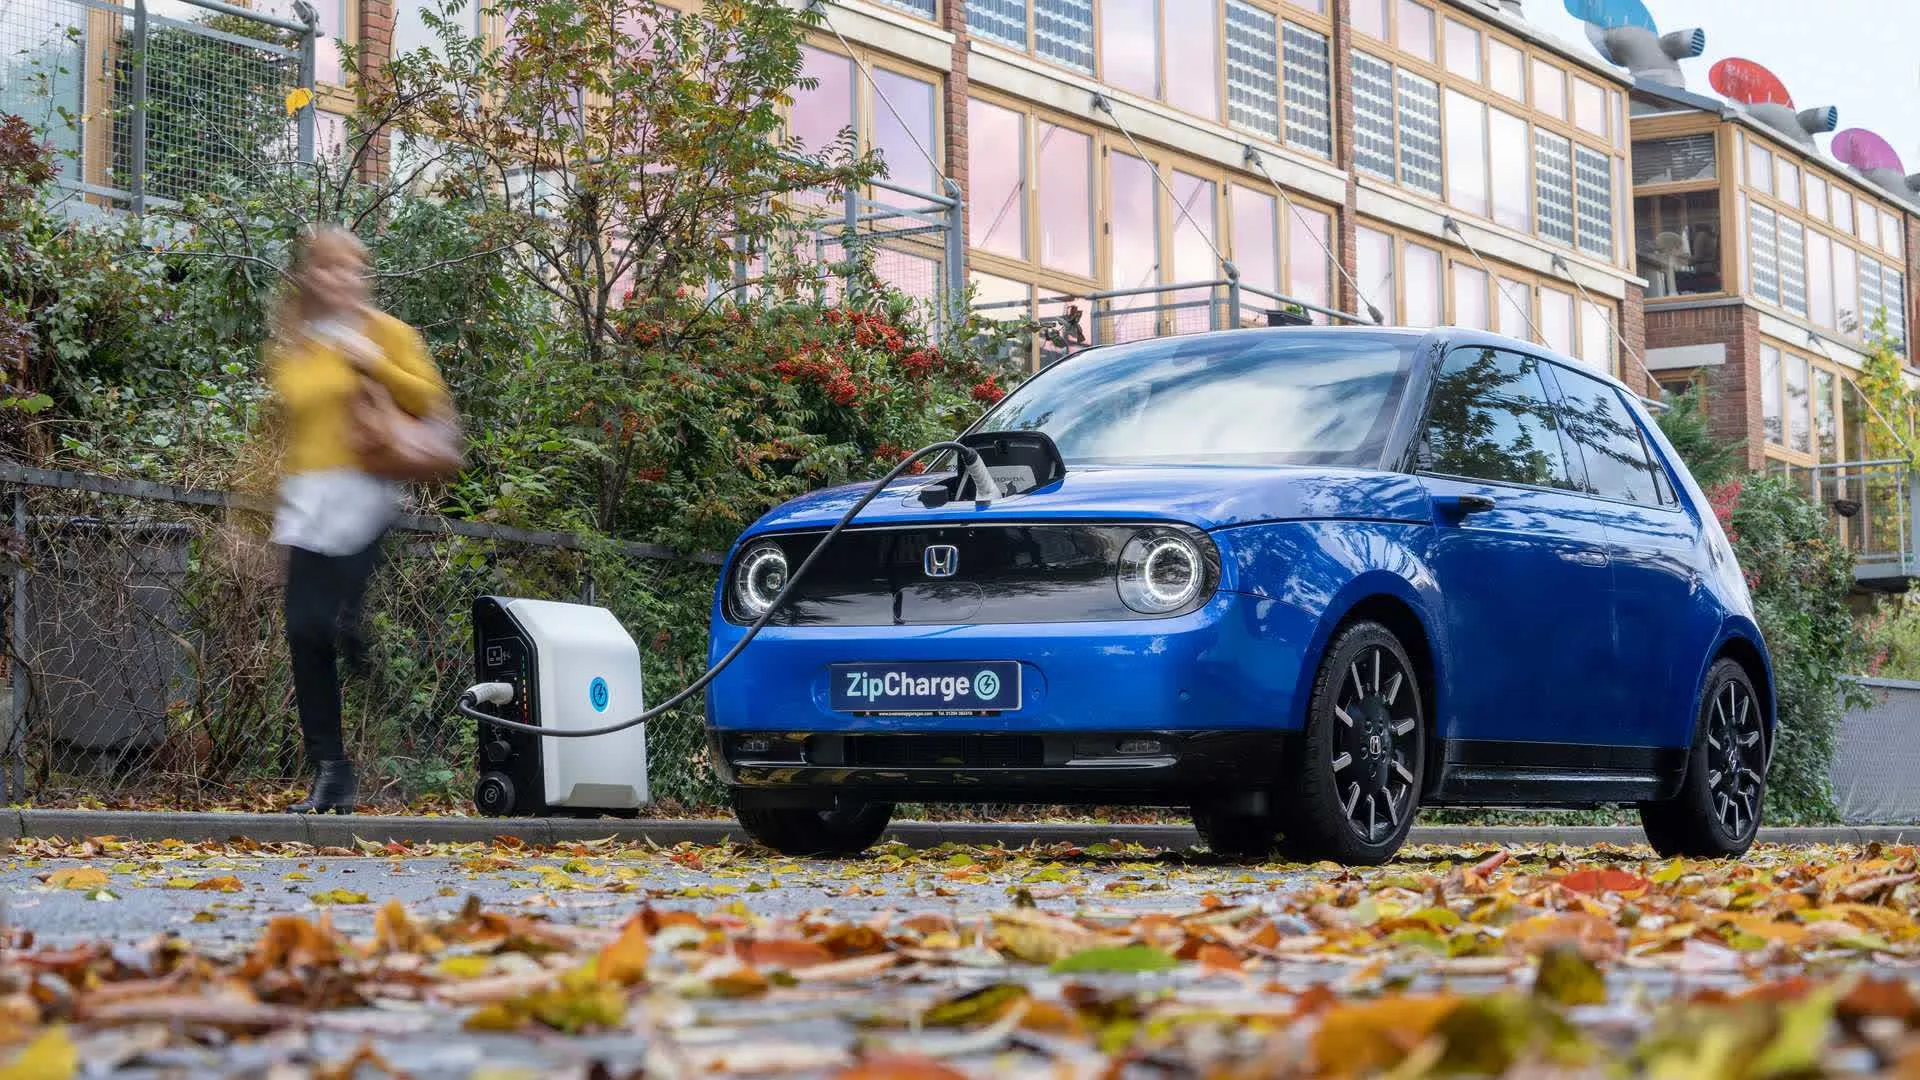 ZipCharge Go is a portable powerbank for your electric vehicle